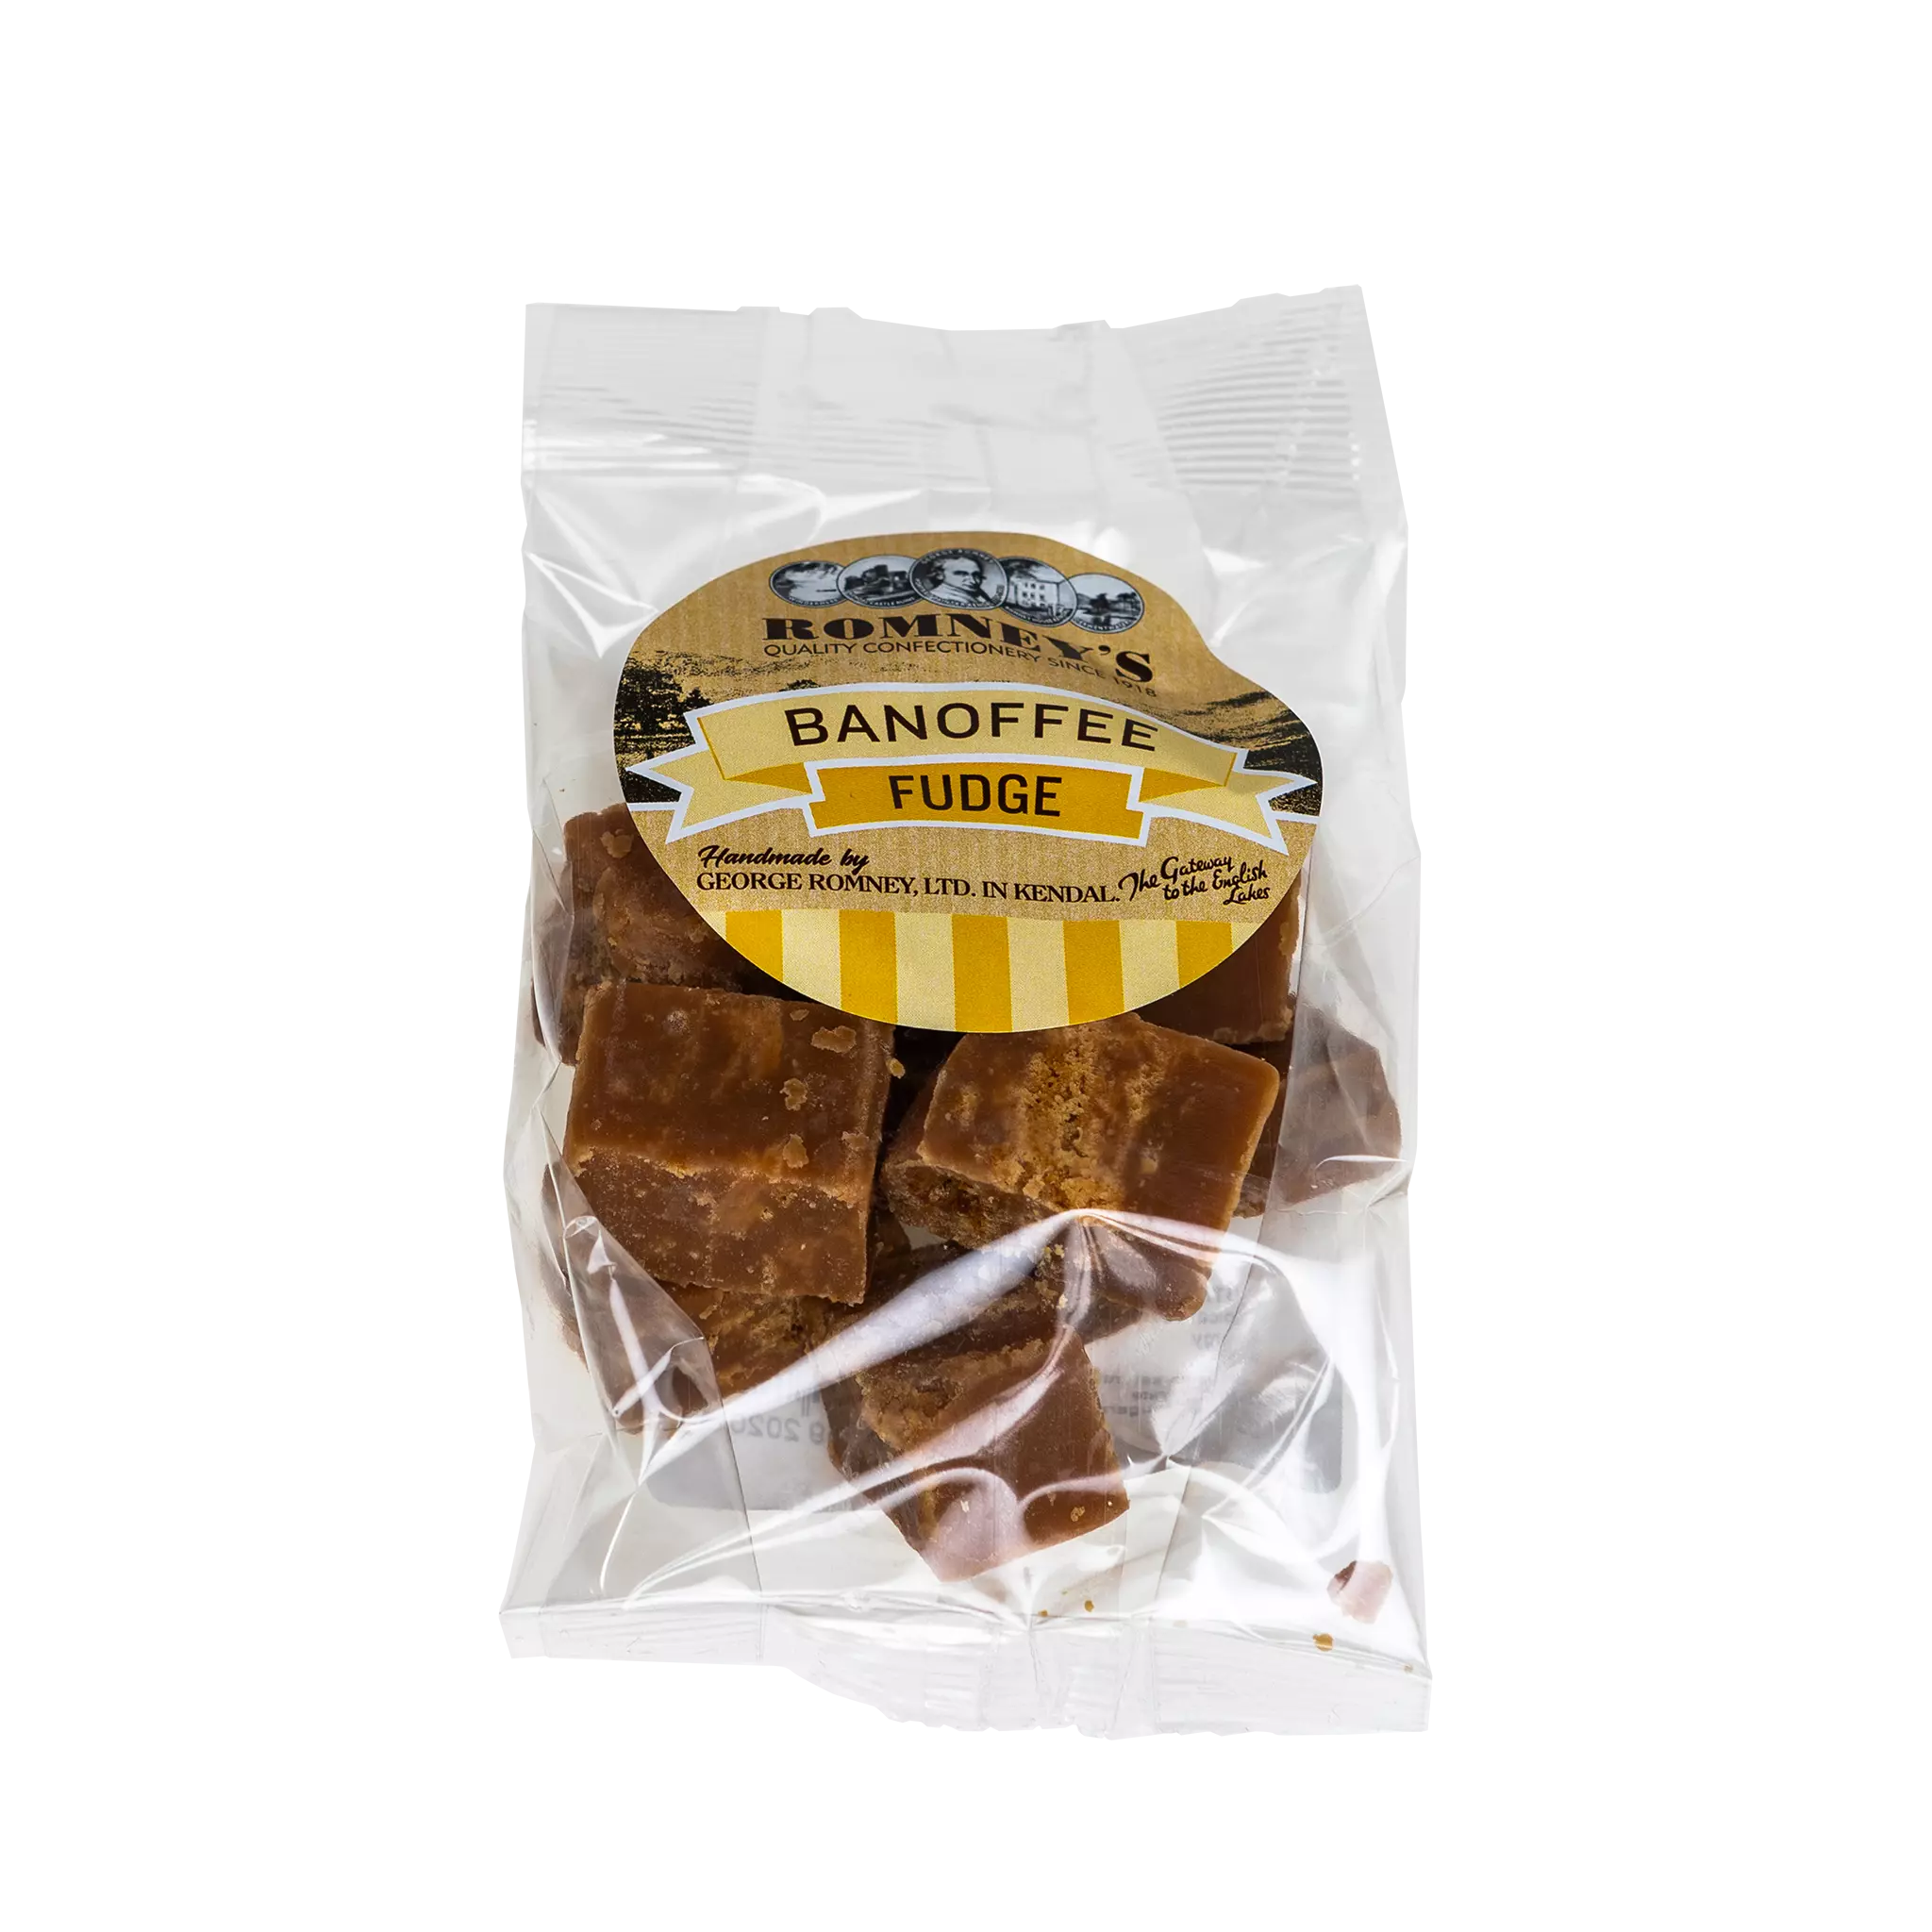 A transparent bag containing pieces of Fudge. The bag has a label on it that shows Romney's logo and says 'Banoffee Fudge'.